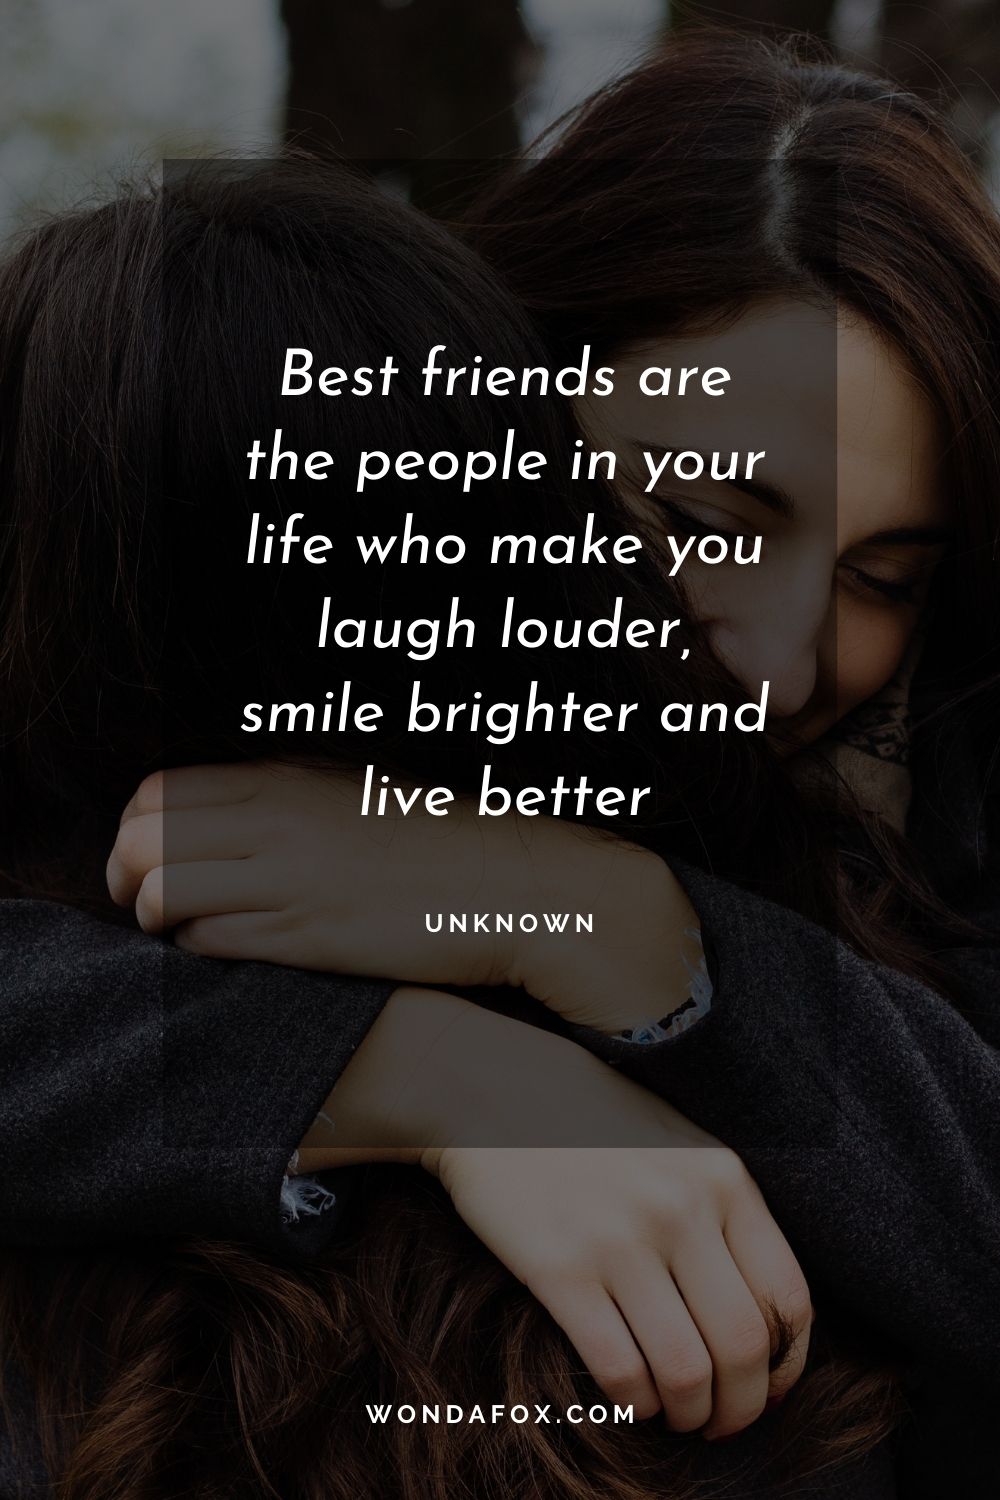 Best friends are the people in your life who make you laugh louder, smile brighter and live better.